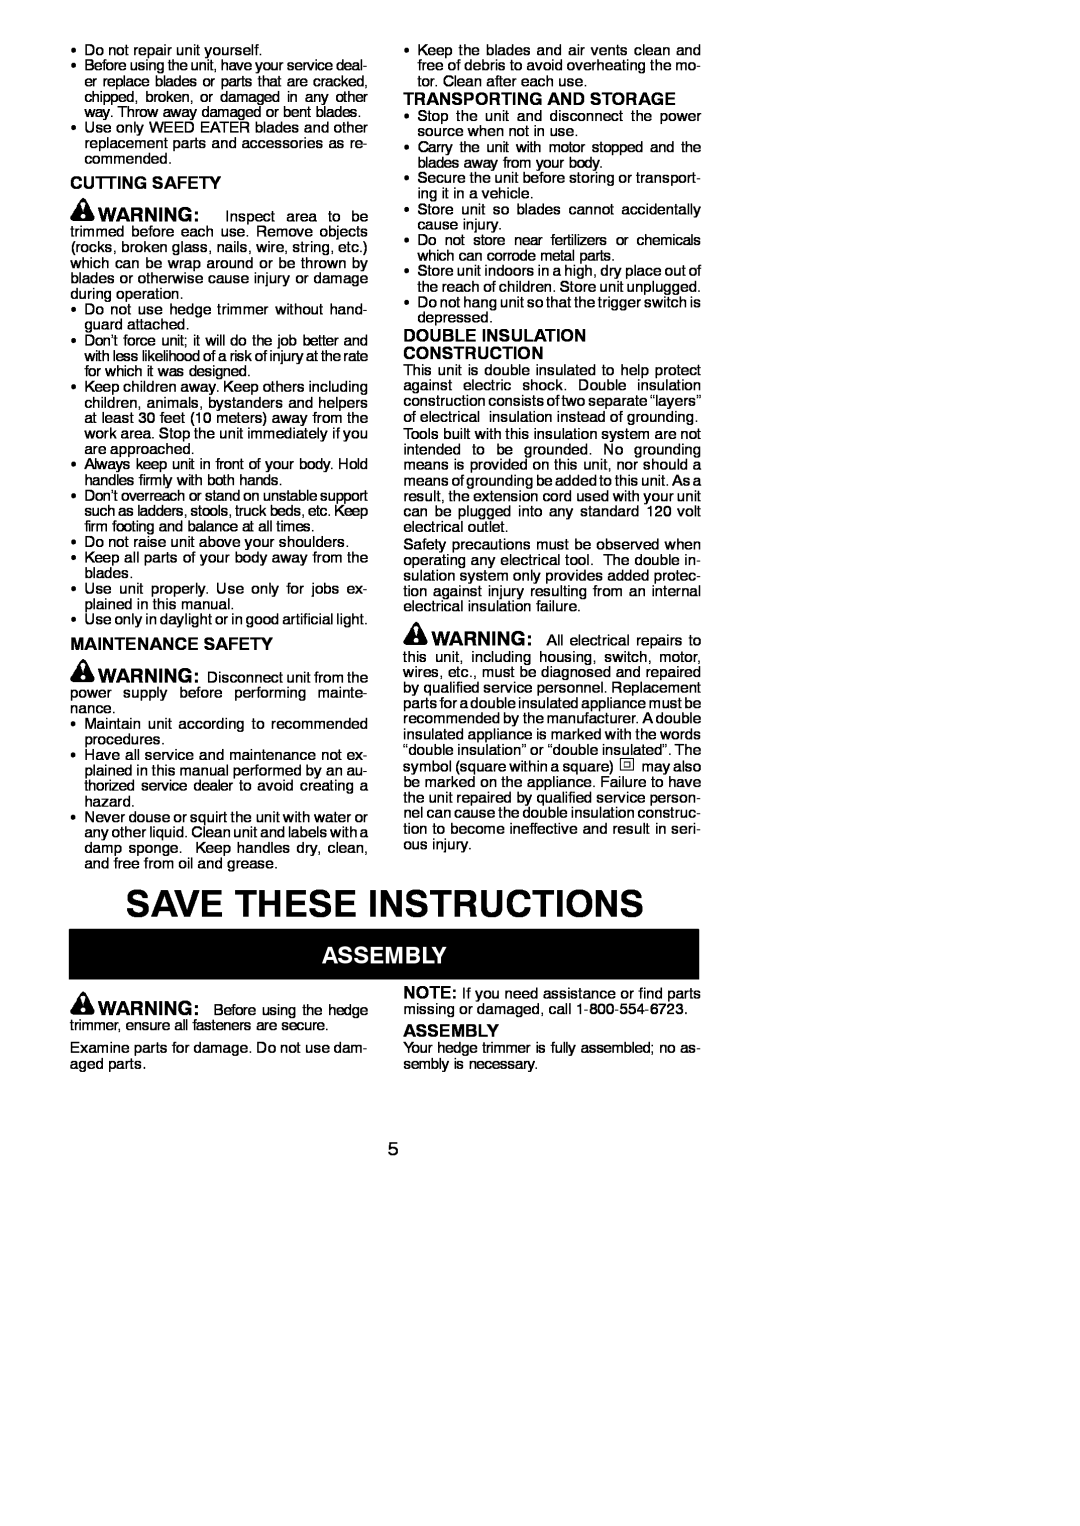 Weed Eater 545117507, HT2400, HT1700 instruction manual Save These Instructions, Assembly 